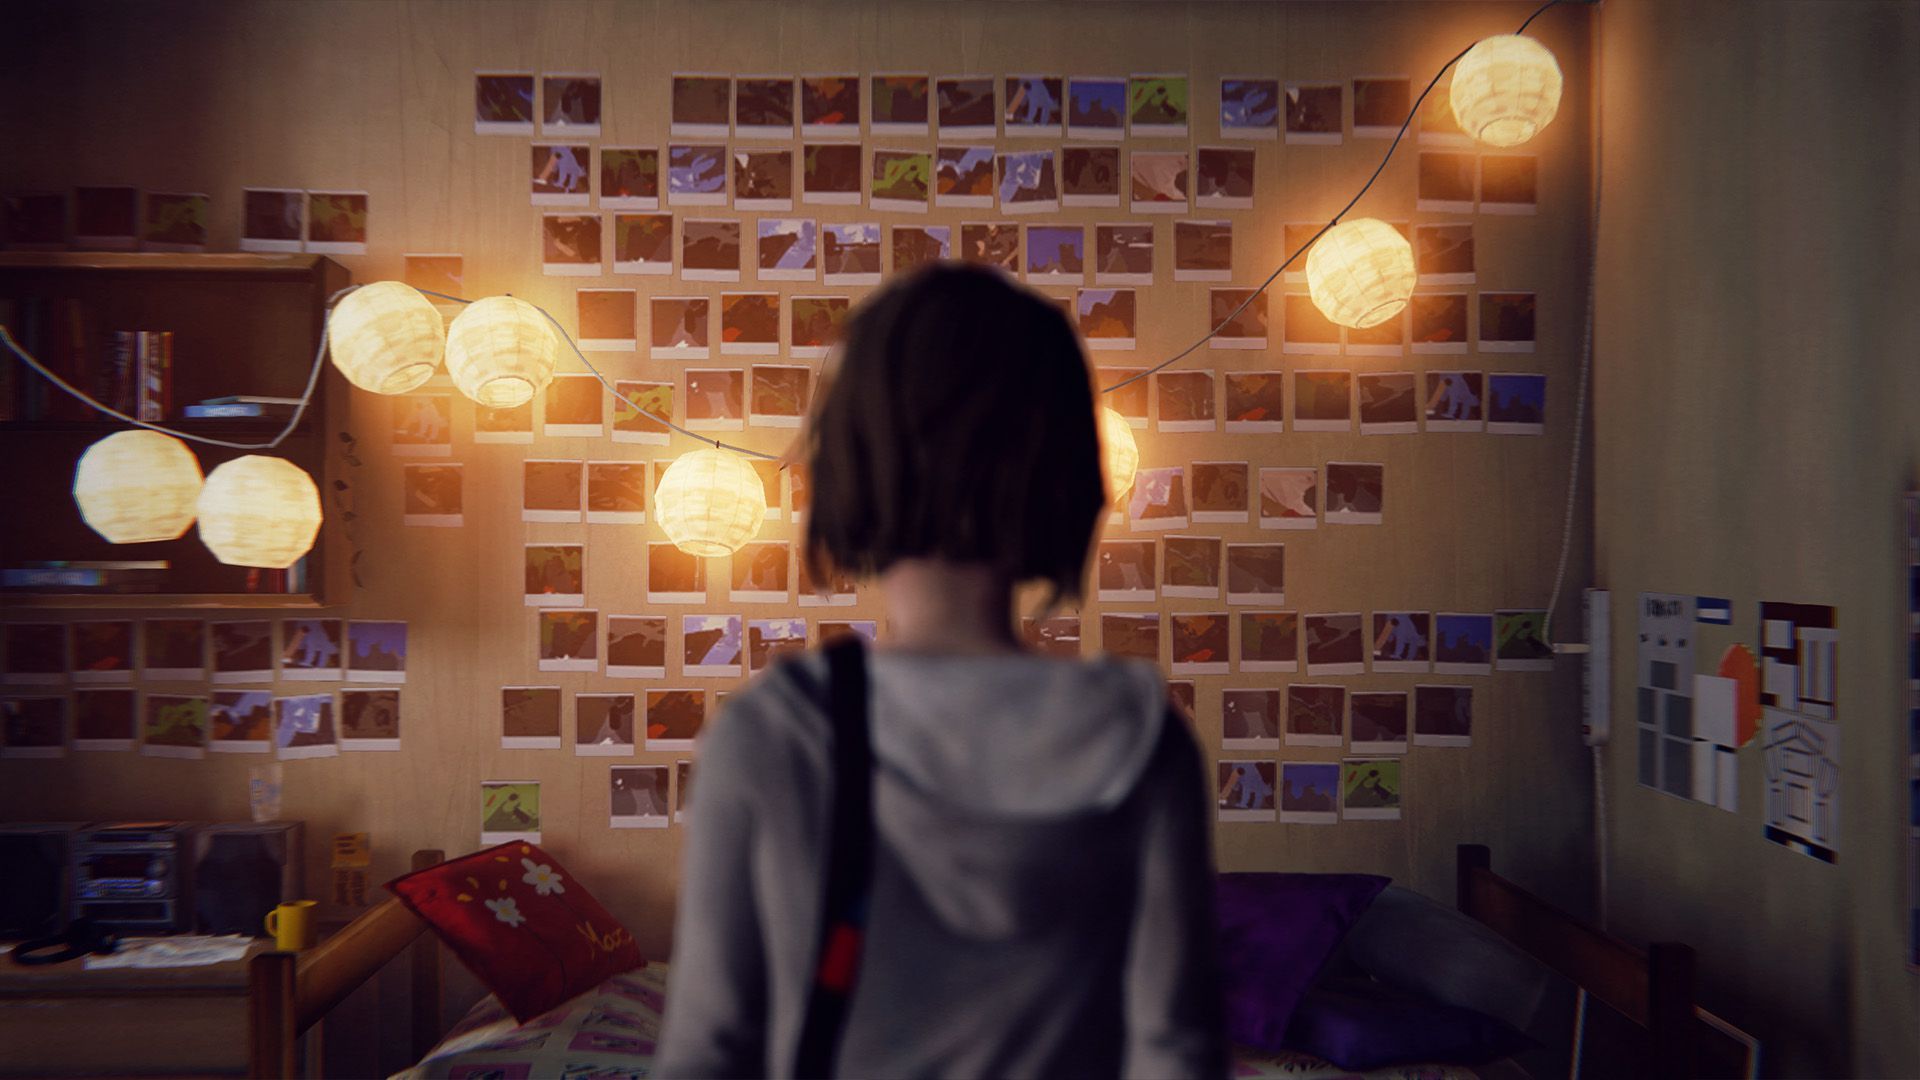 Screencap of a scene from a video game showing a person's back as they face a wall of photos